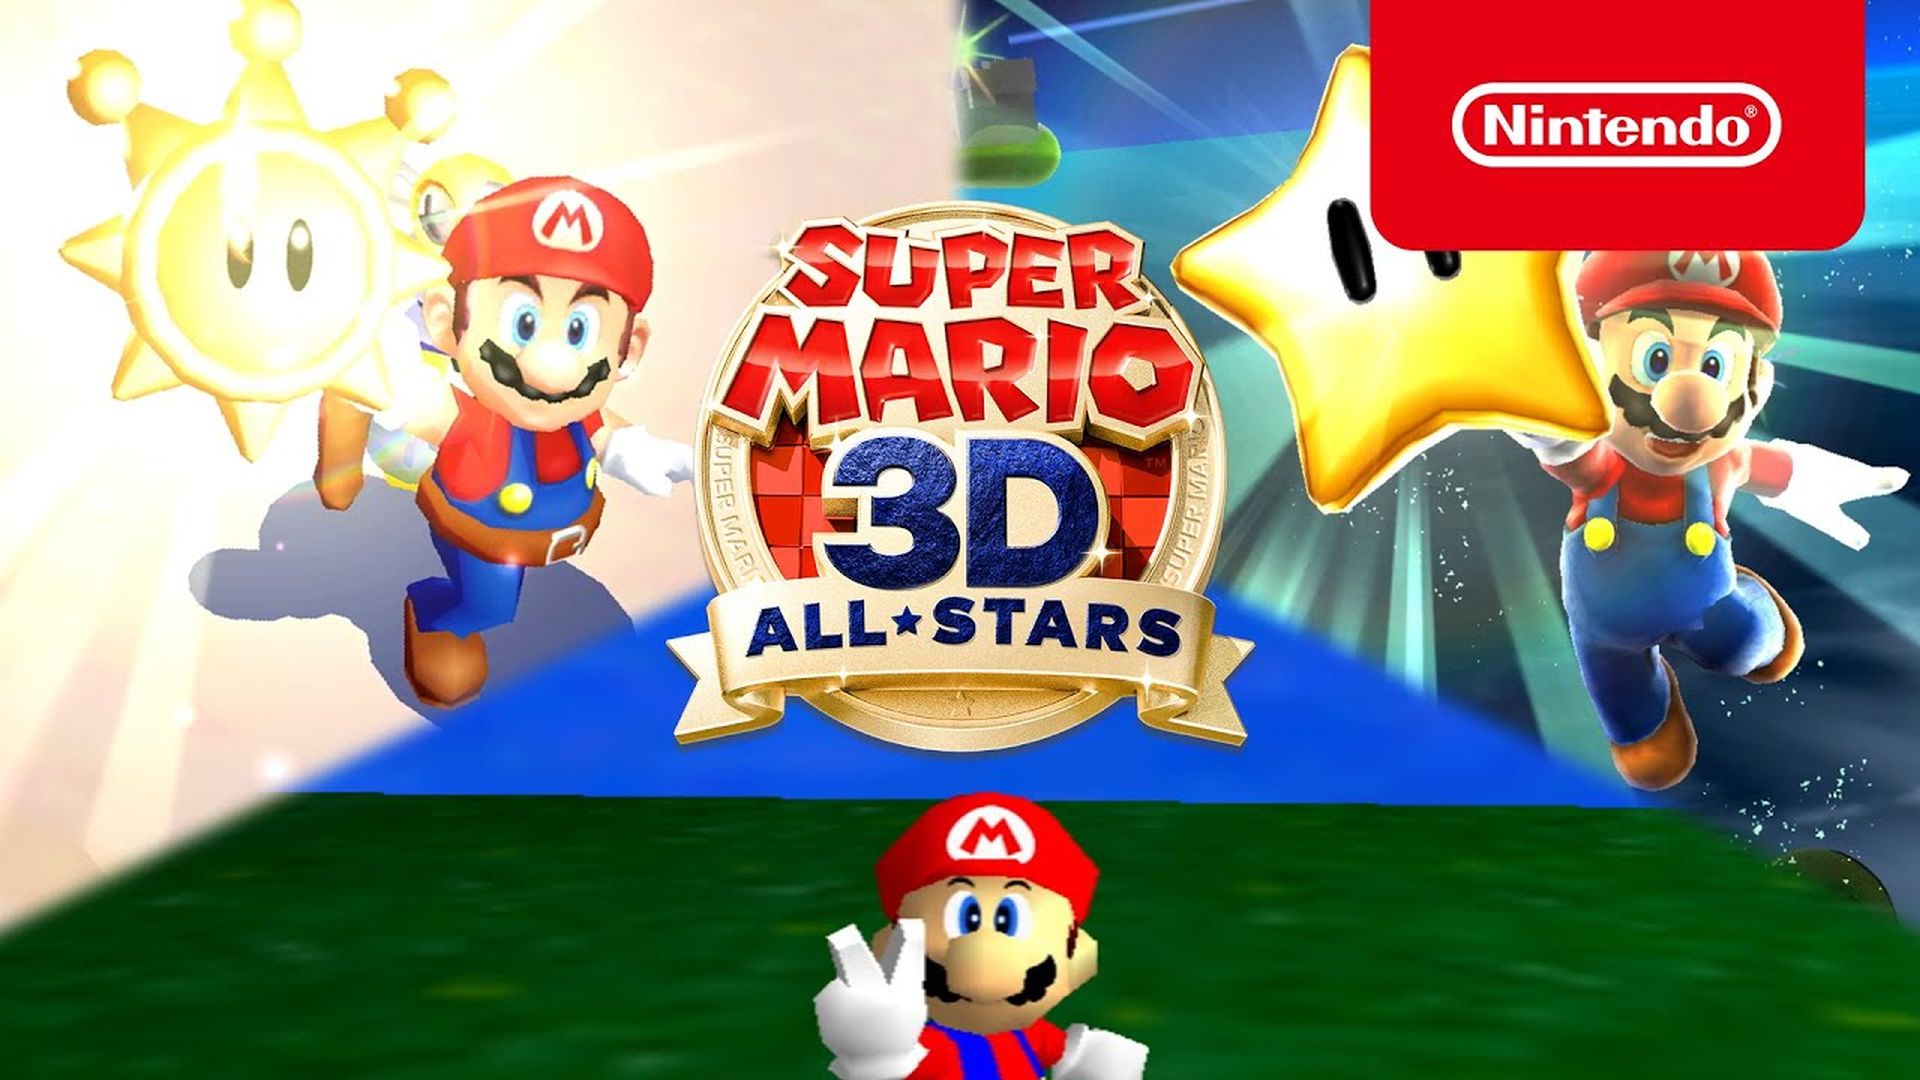 Super Mario 3d All Stars Is Among Amazon’s 2020 Best Sellers